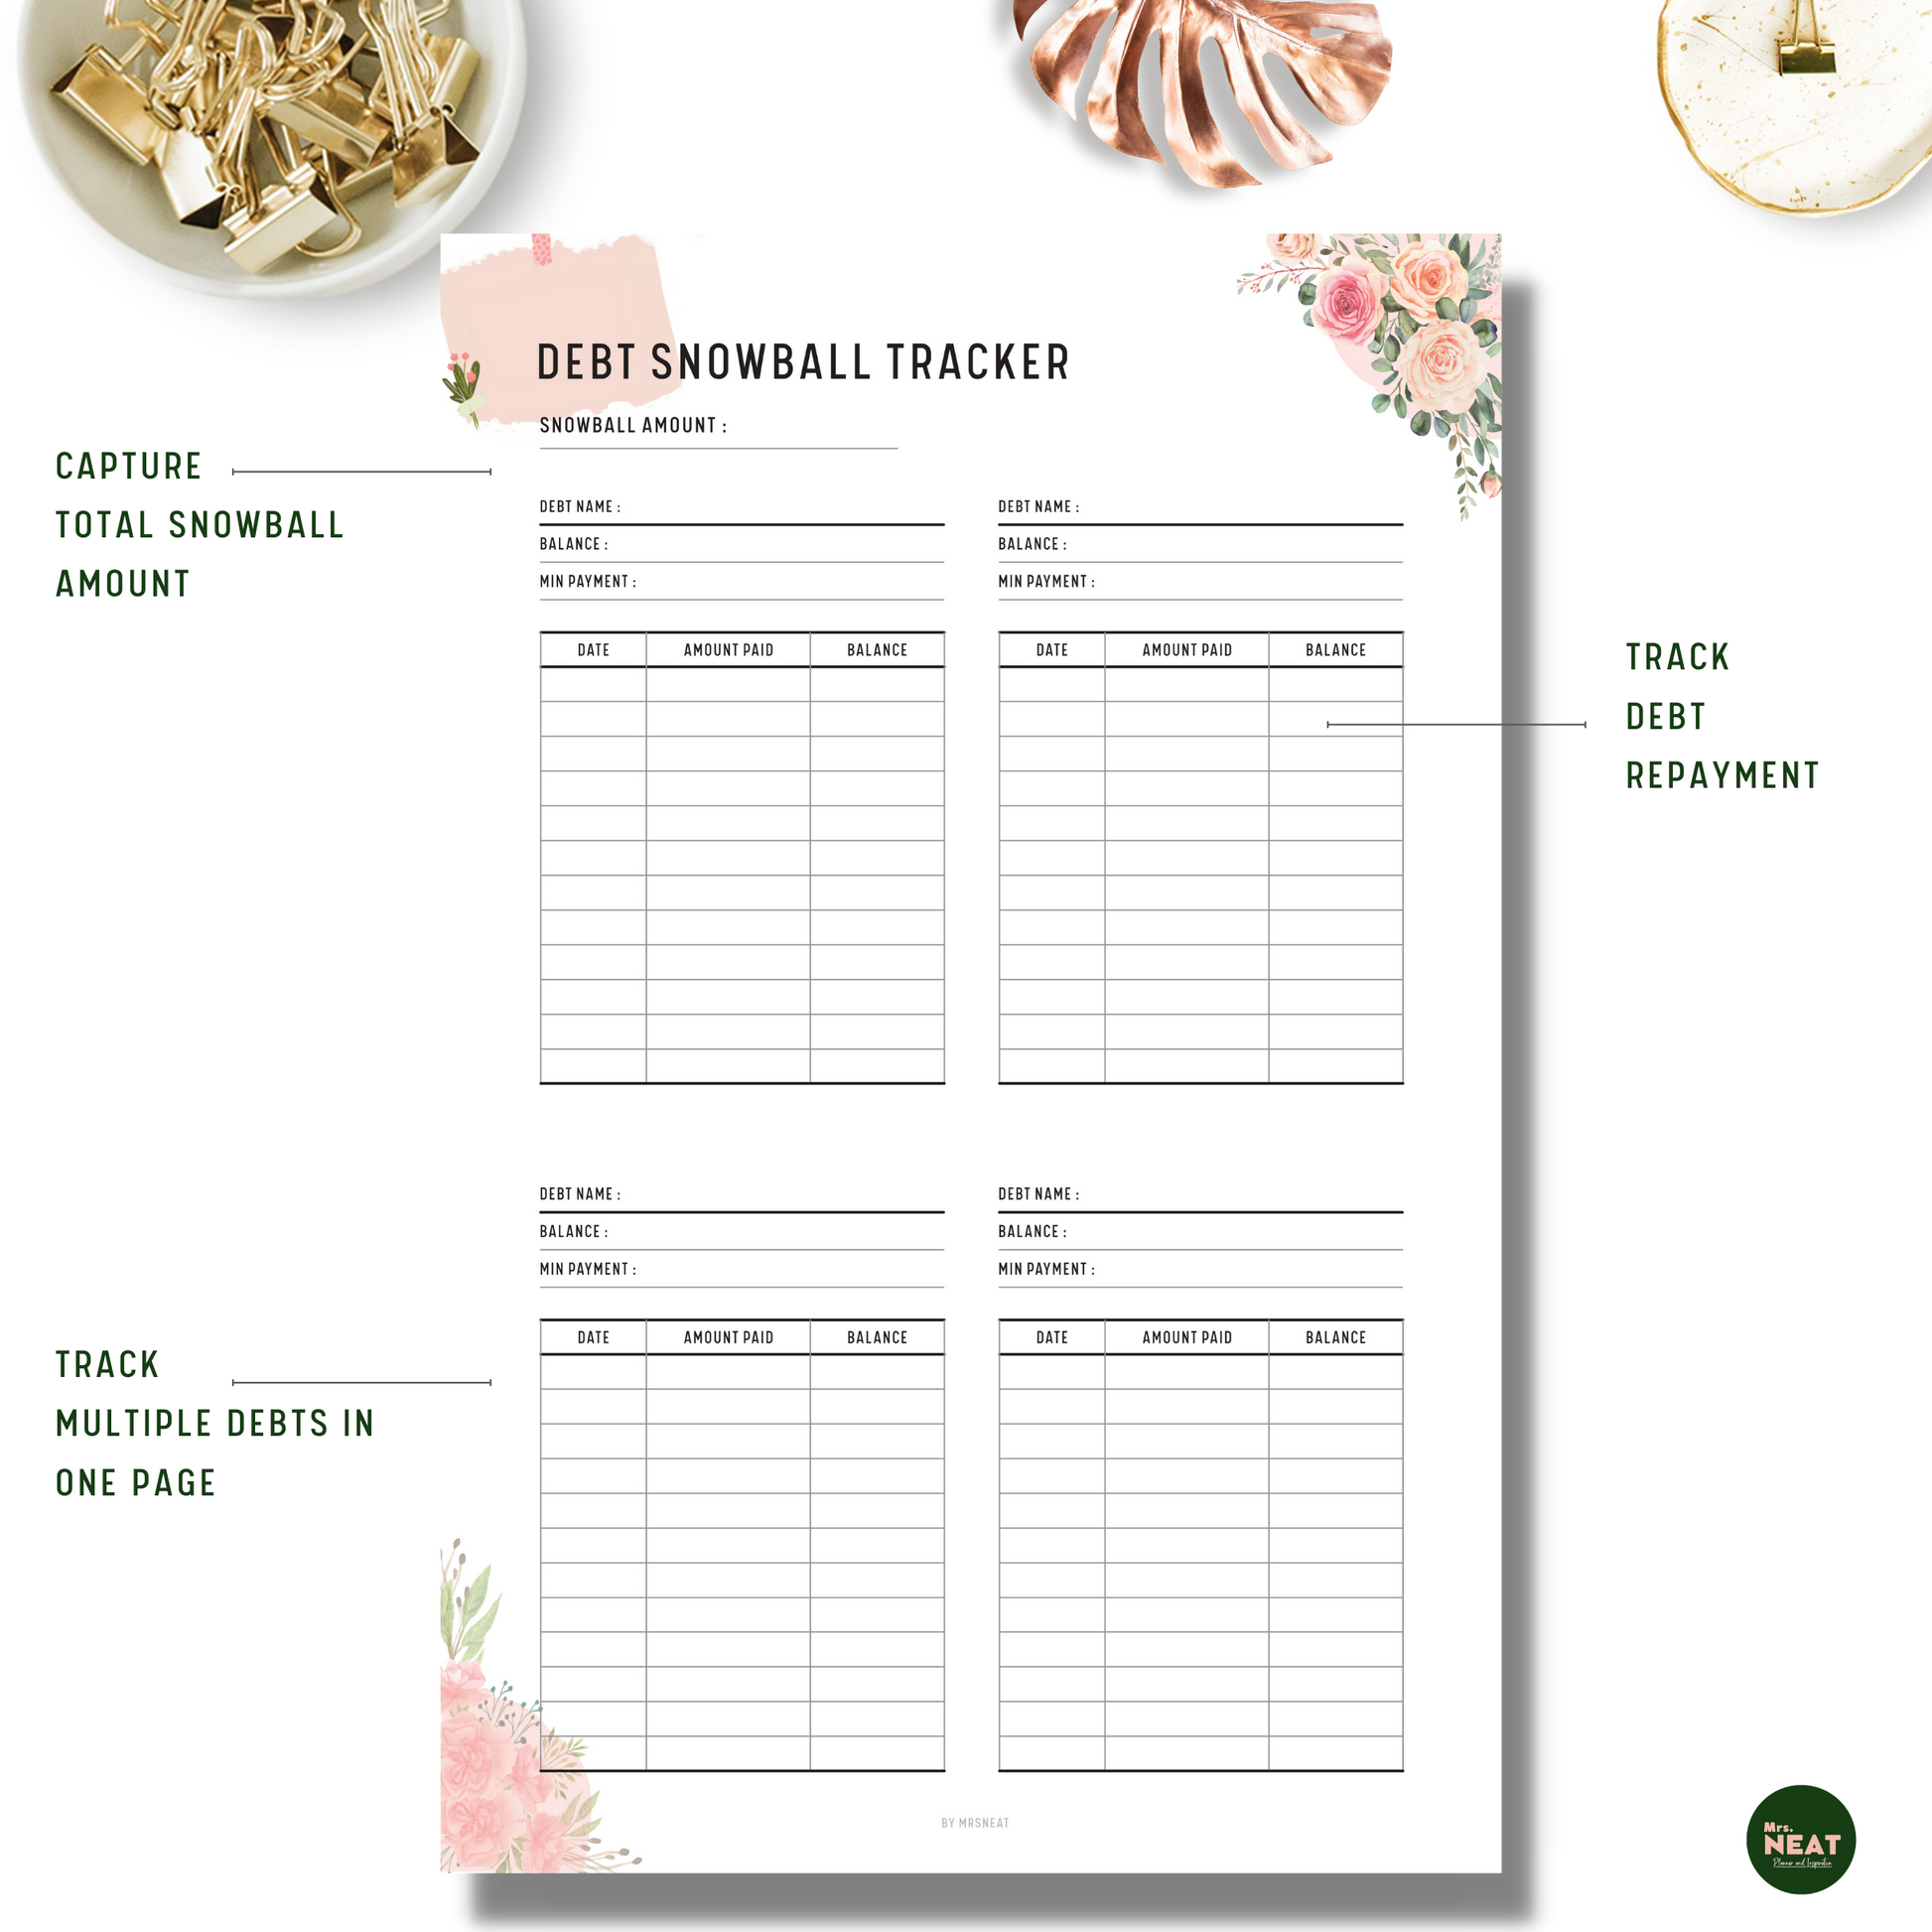 Floral Debt Snowball Tracker with room for total snowball amount, debt repayment, and capture multiple debts in one page